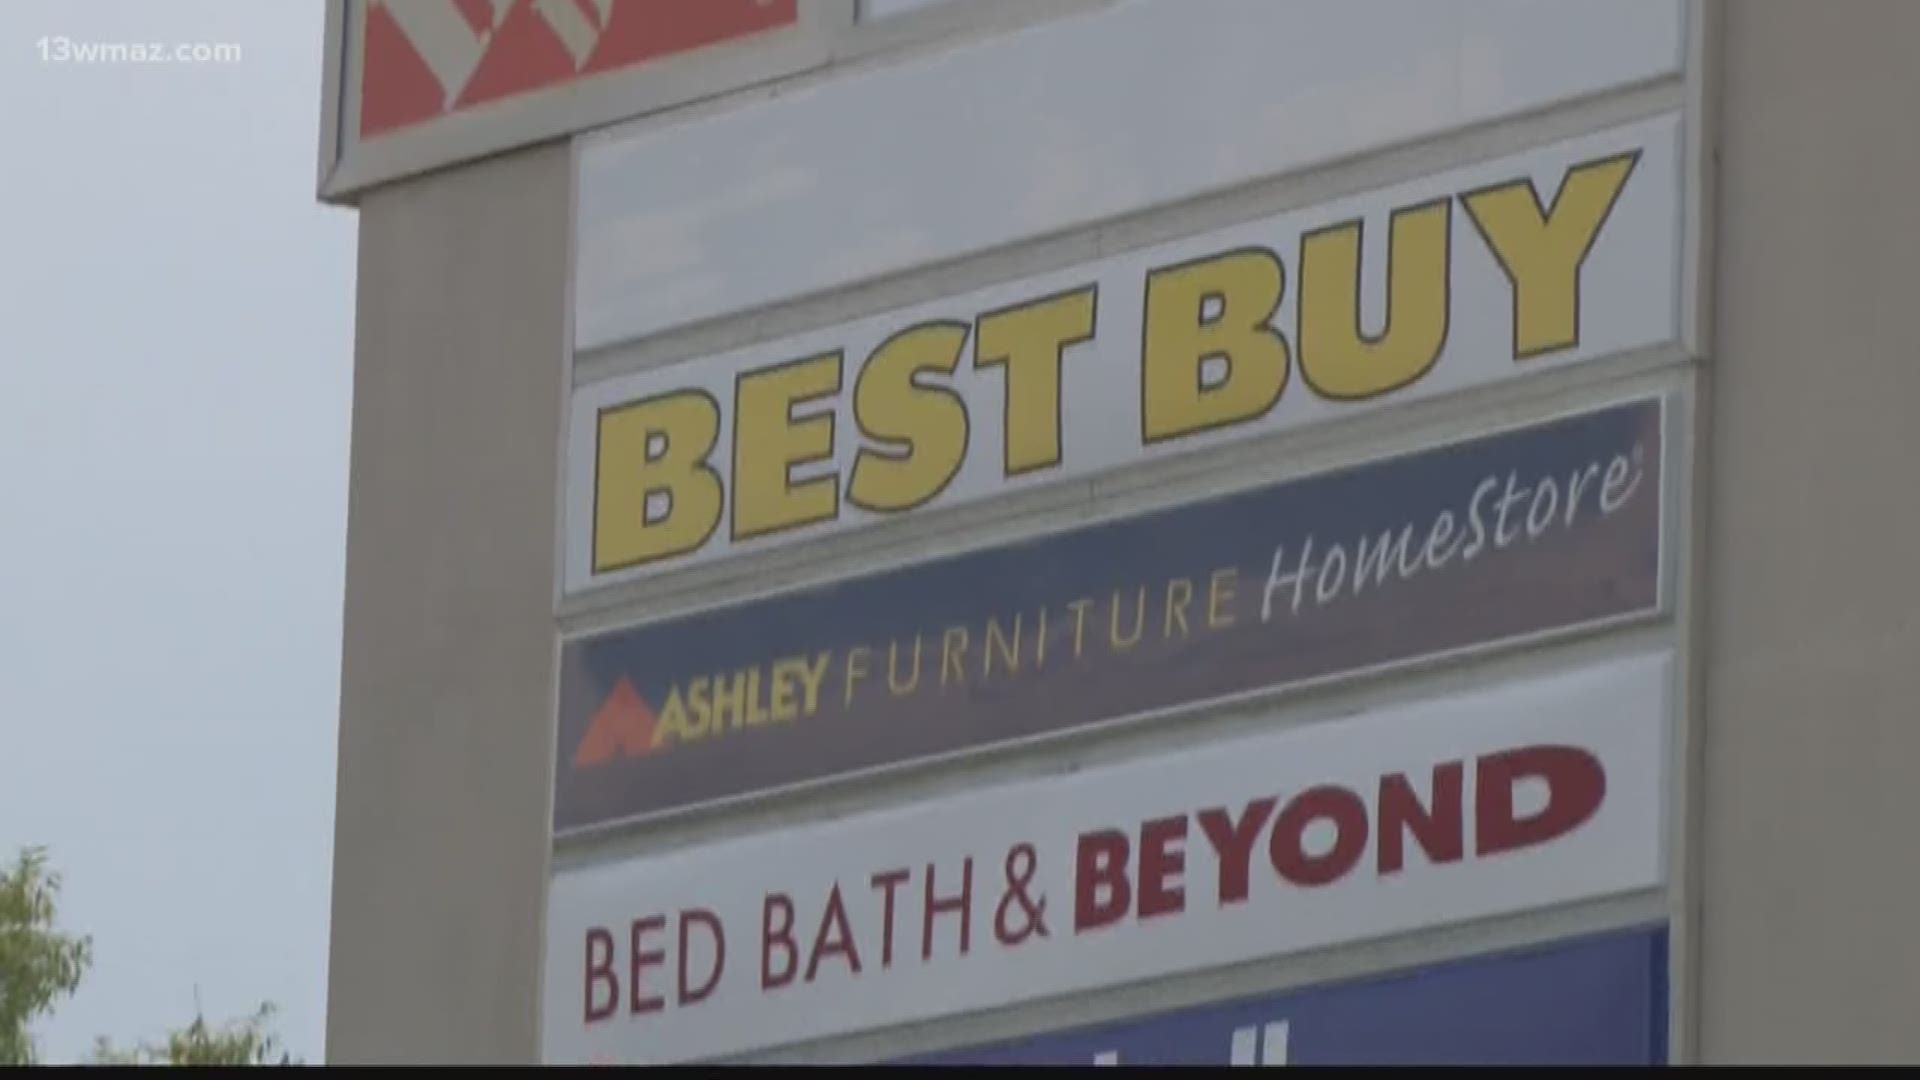 Stores are opening this week at the new North Macon Plaza, but that means some of them are closing across town in an area that’s already been hit hard by the departure of big box retailers.